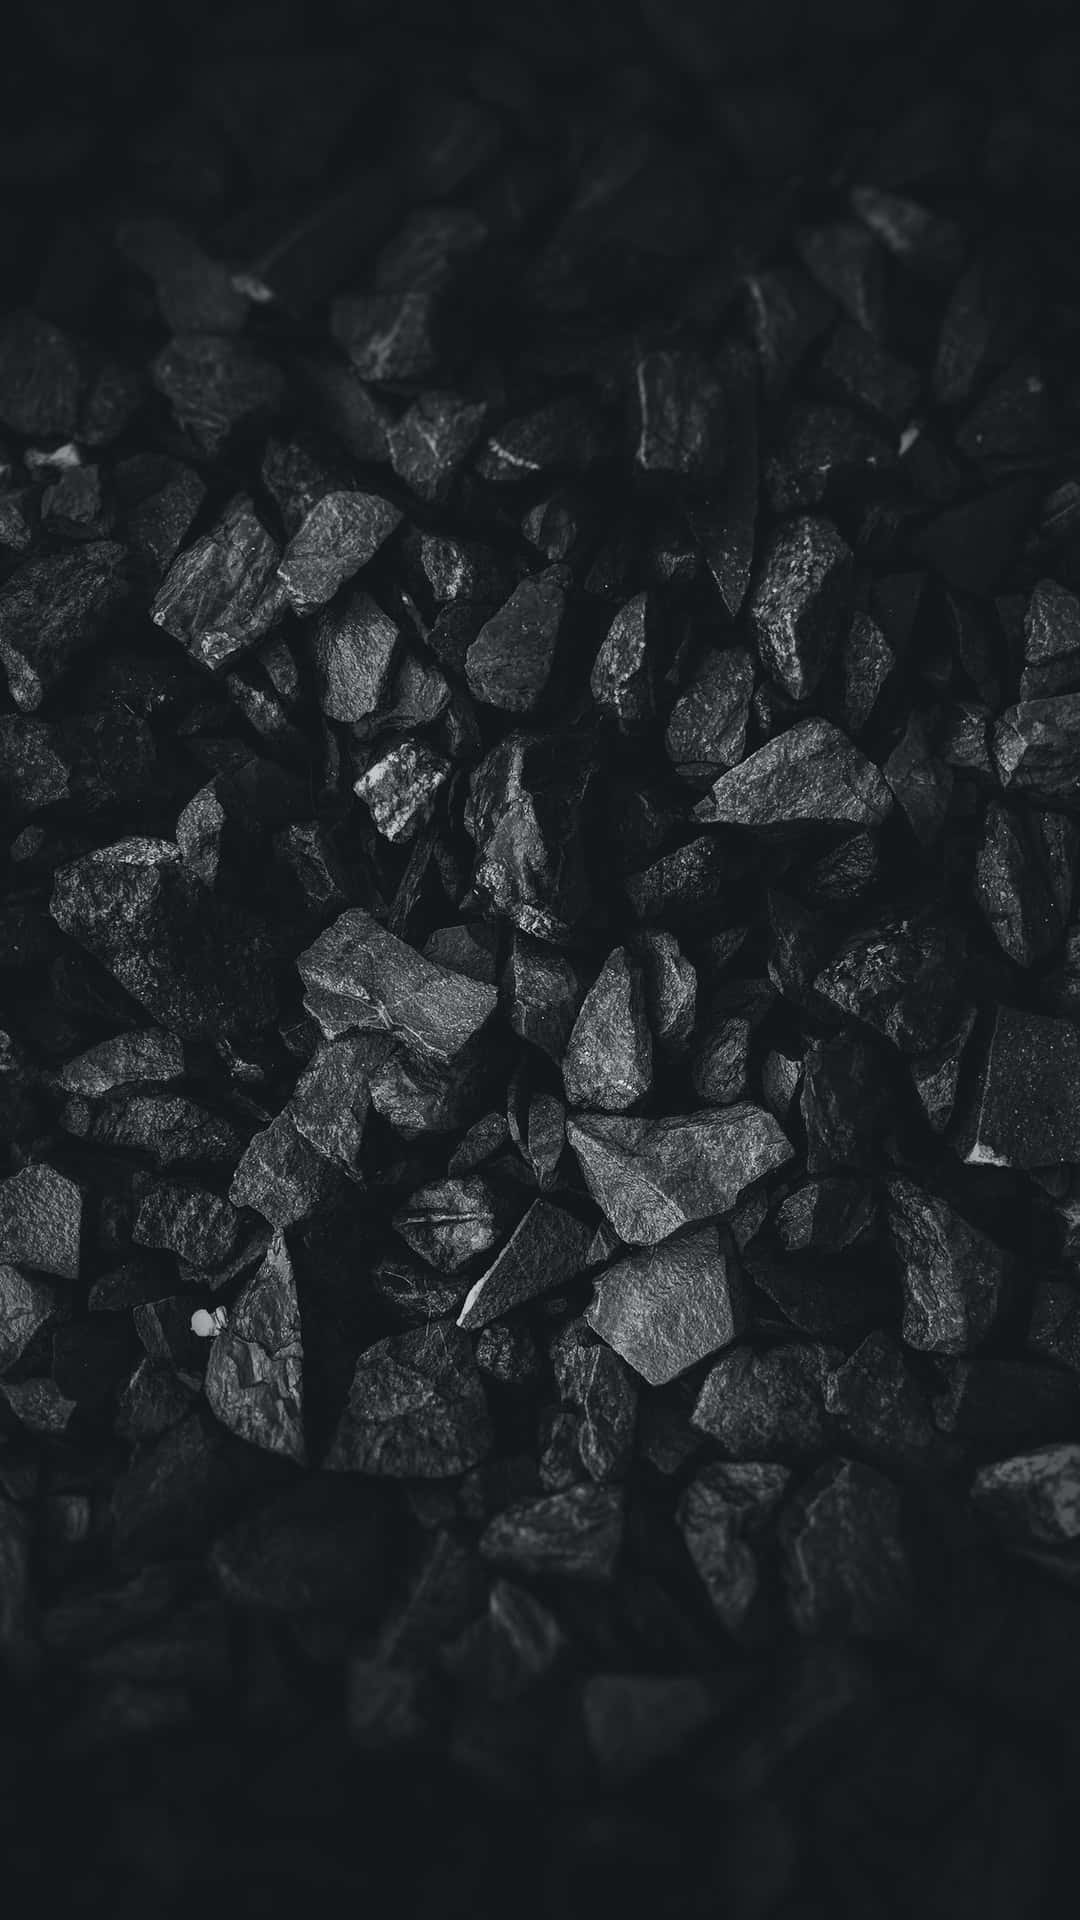 Black And White Photo Of A Pile Of Rocks